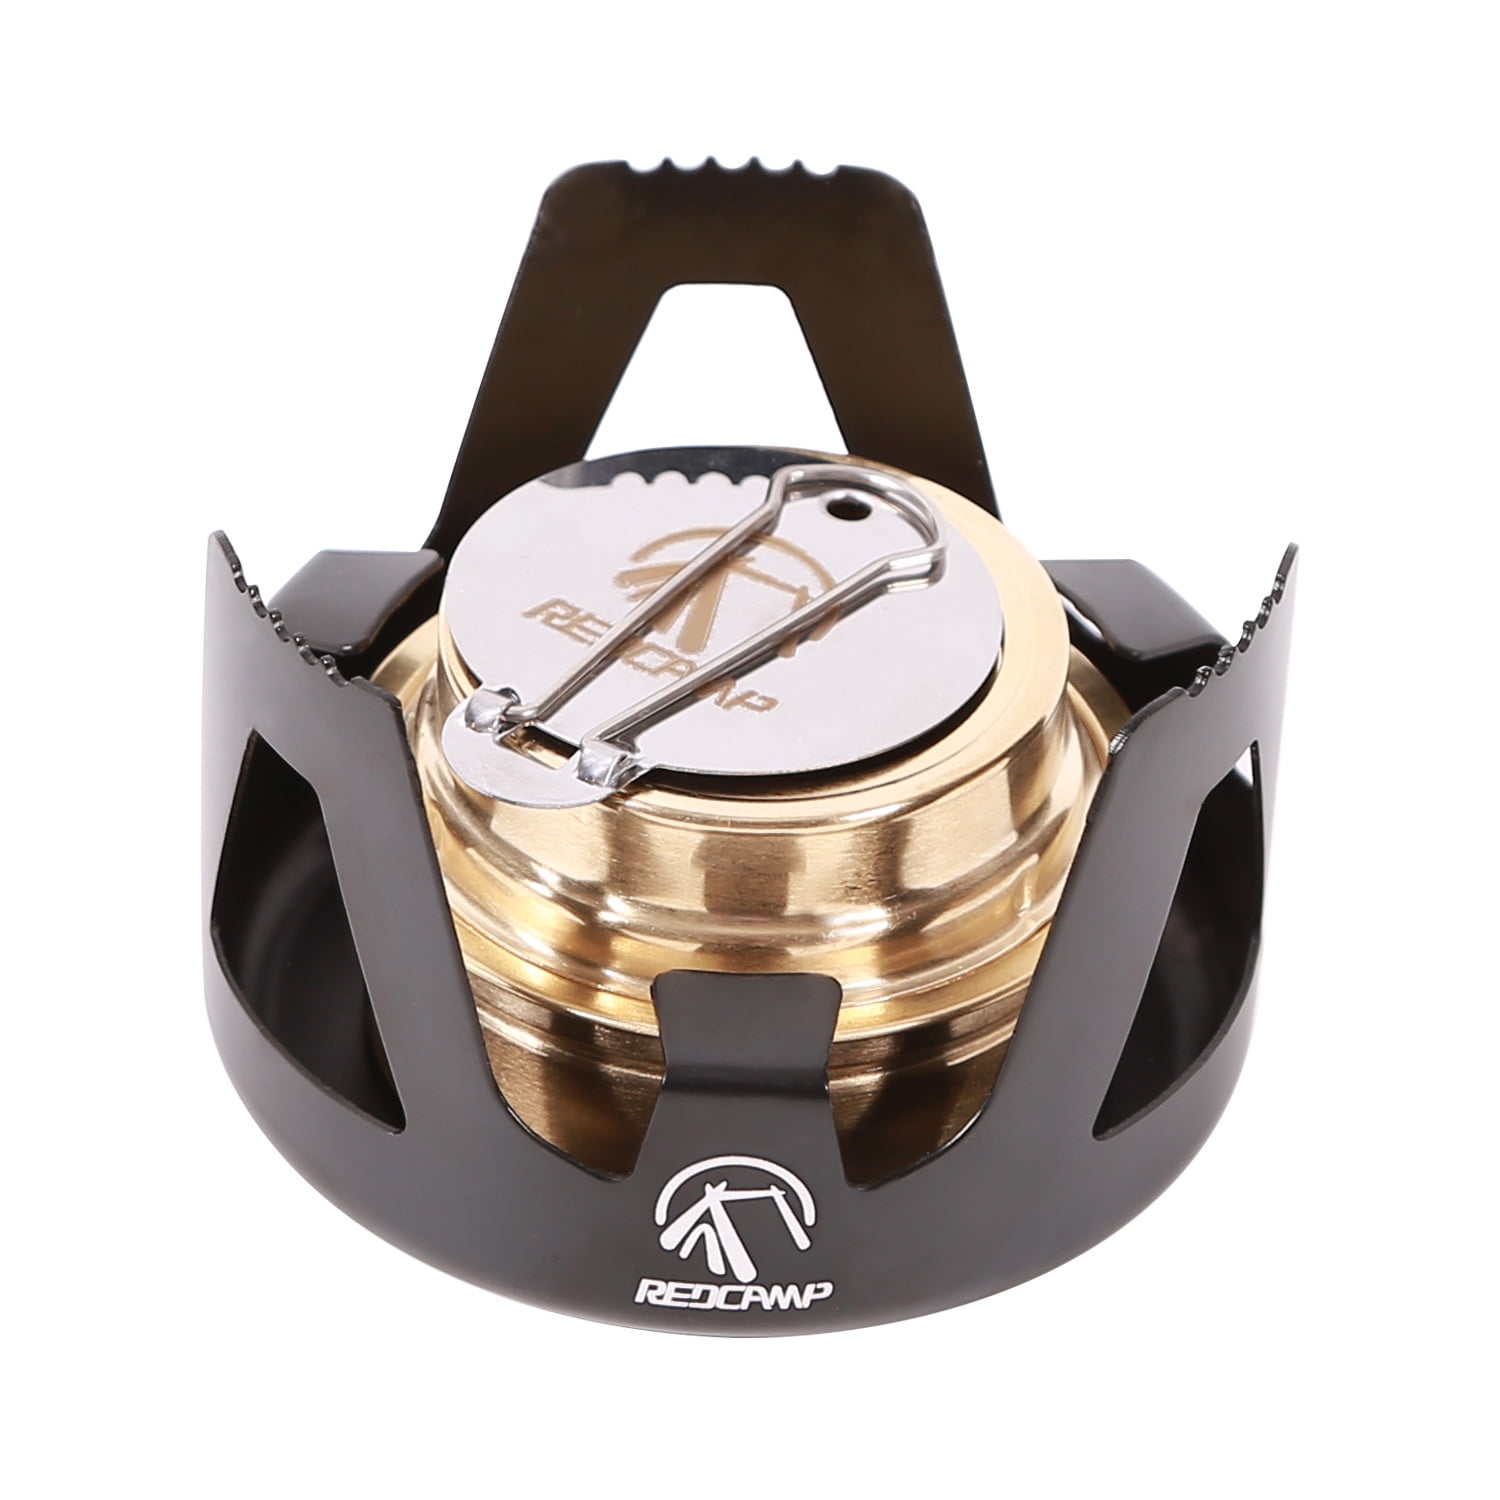 Portable Mini Alcohol Stove Burner with Aluminium Stand for Camping BBQ Cookware 